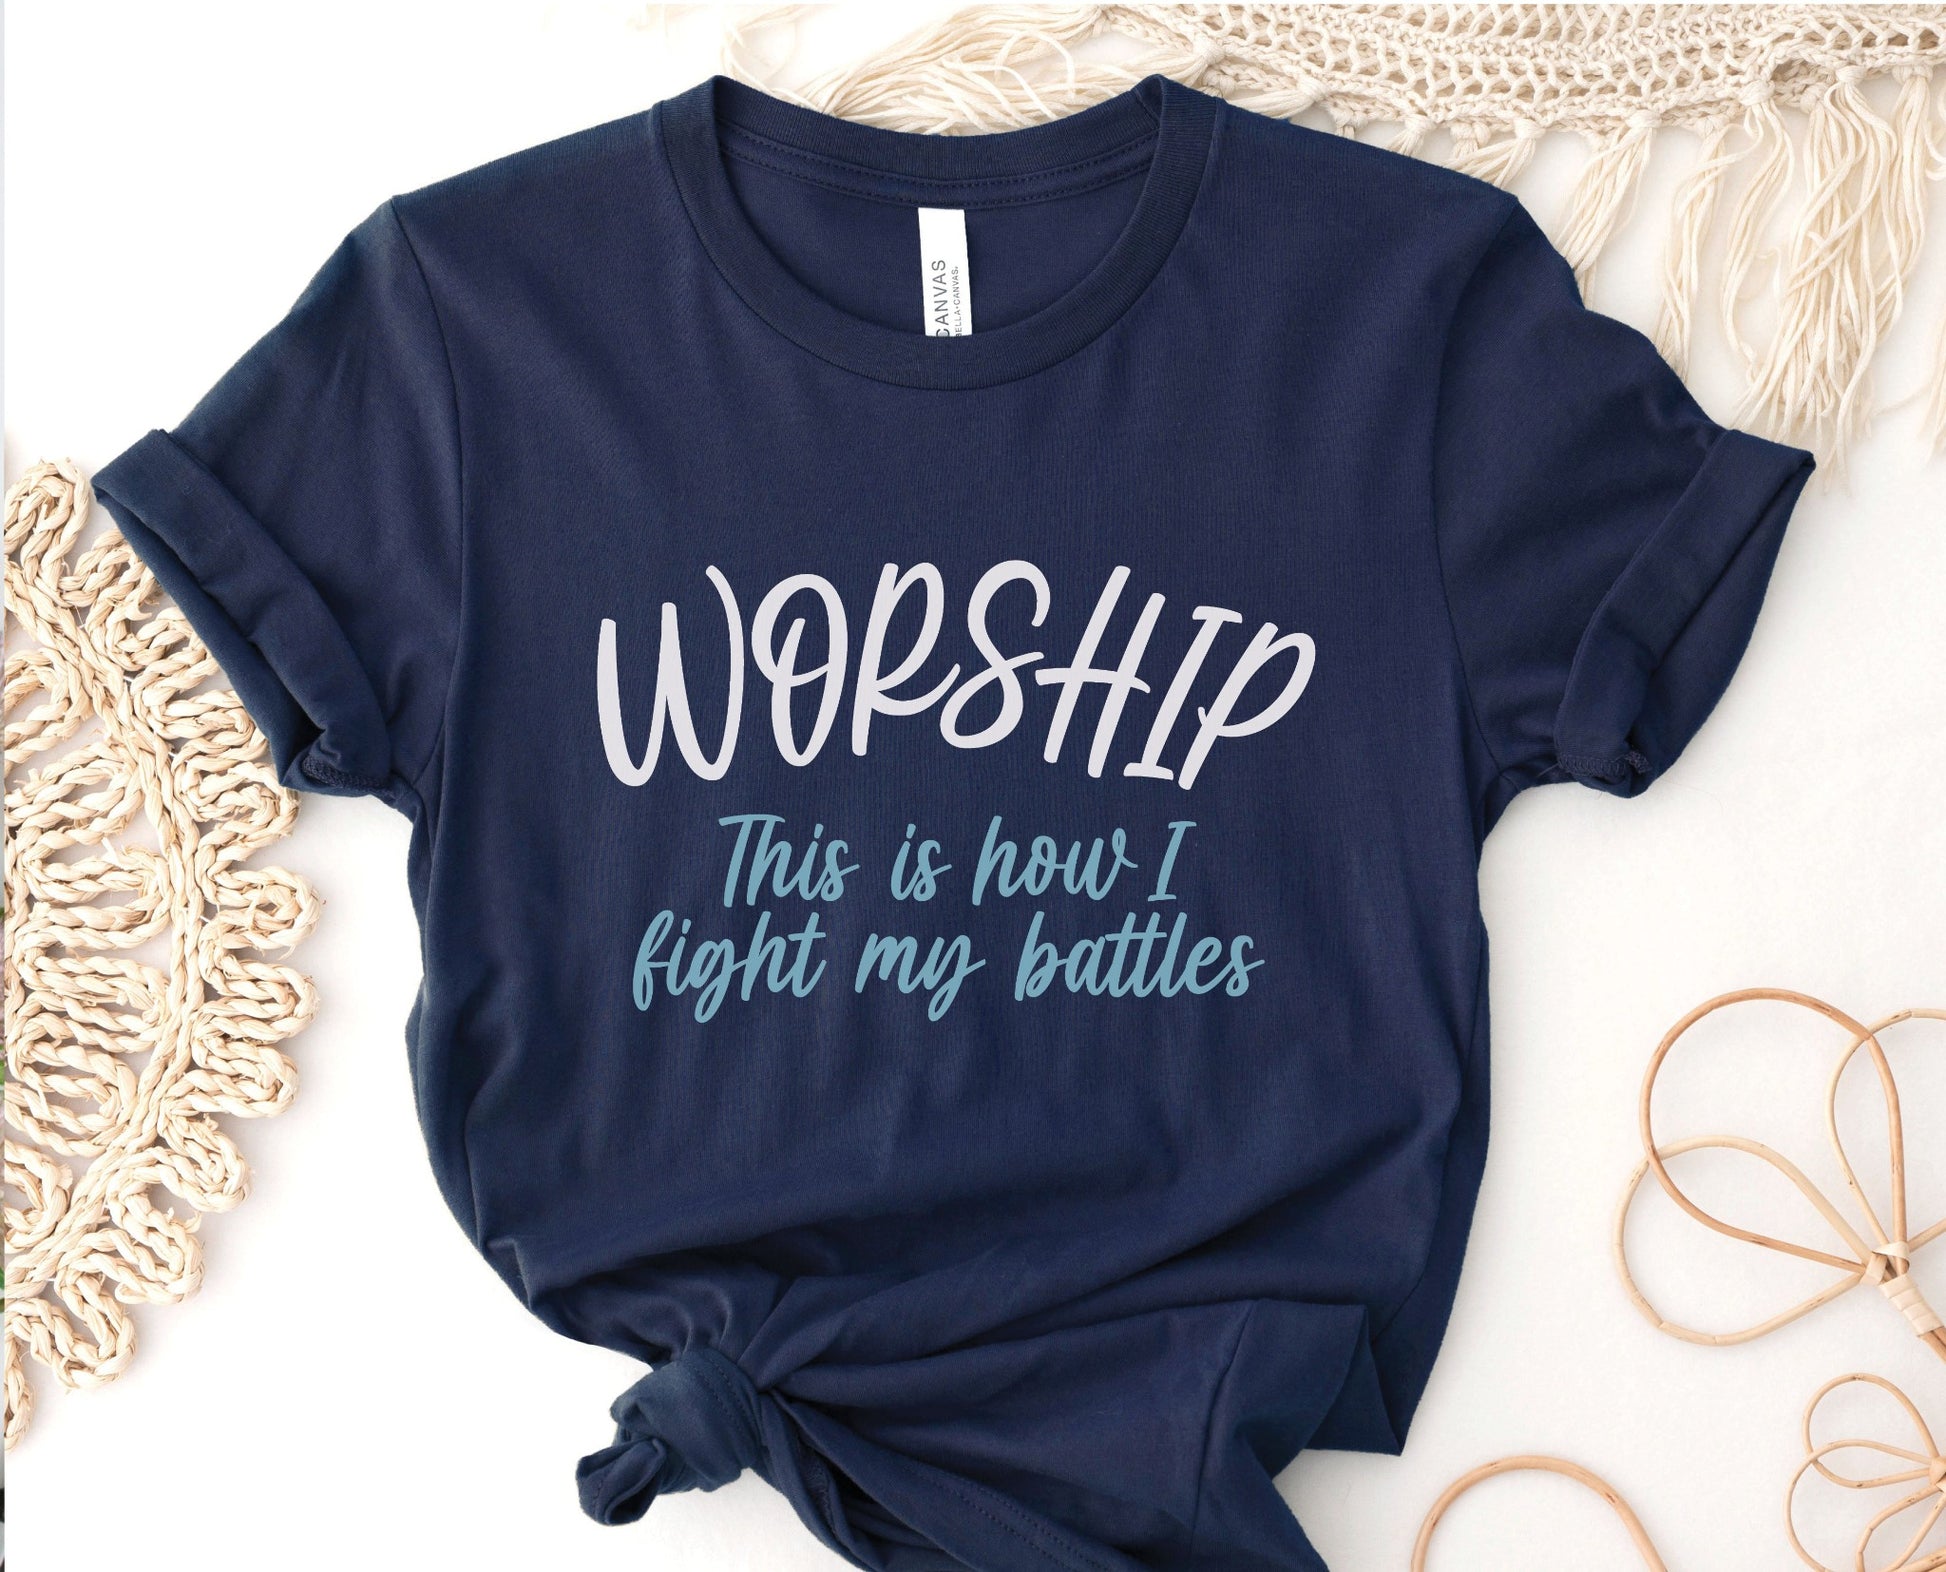 Worship This Is How I Fight My Battles Christian aesthetic t-shirt design printed in white and teal on navy blue tee for women, great gift for worship leaders